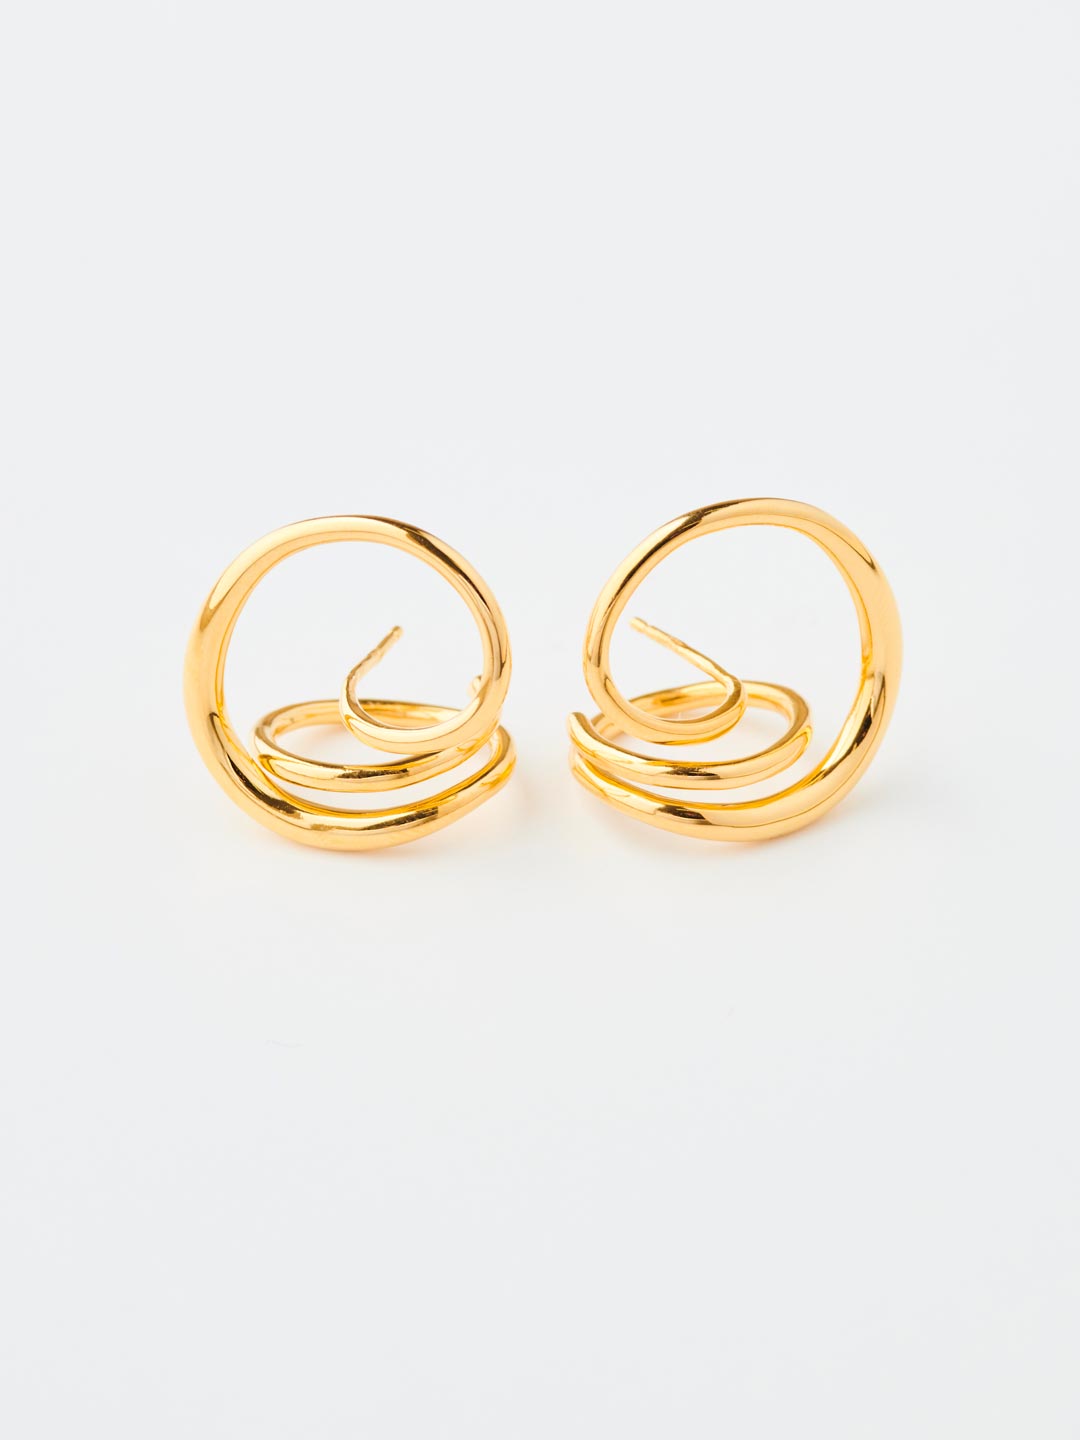 Round Trip PAIR Pierced Earrings - Yellow Gold